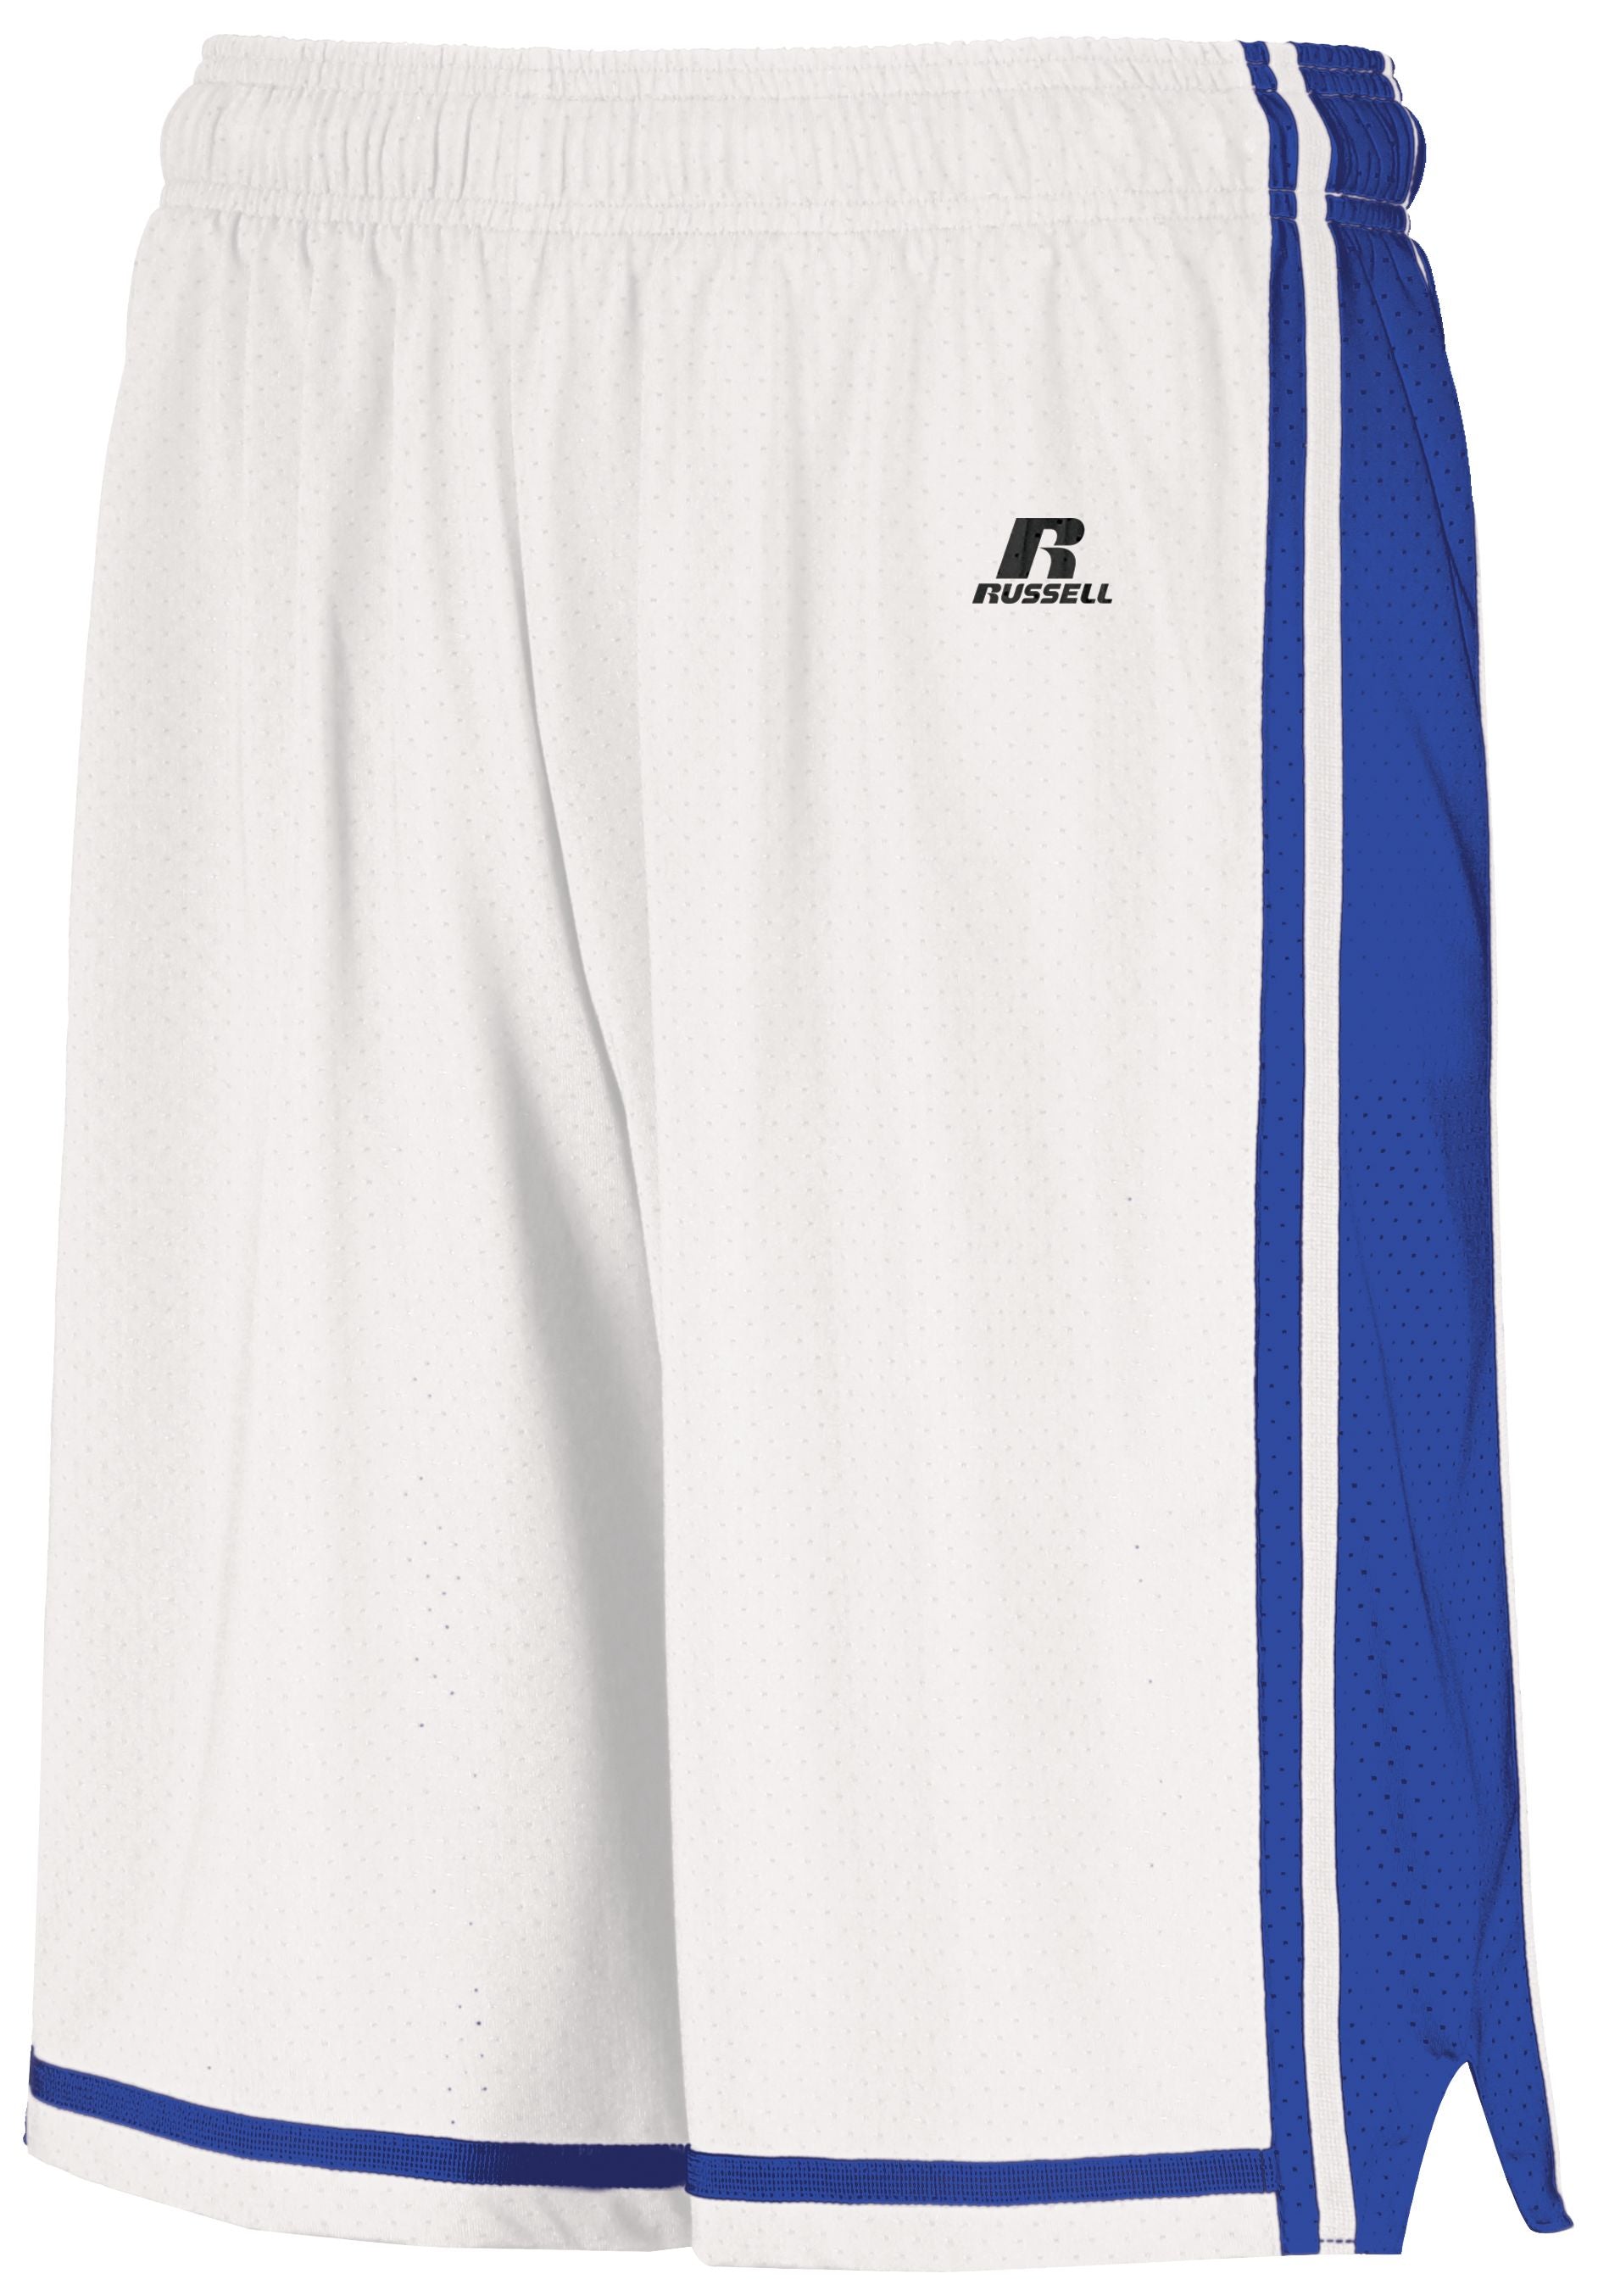 Russell Athletic Legacy Basketball Shorts in White/Royal  -Part of the Adult, Adult-Shorts, Basketball, Russell-Athletic-Products, All-Sports, All-Sports-1 product lines at KanaleyCreations.com